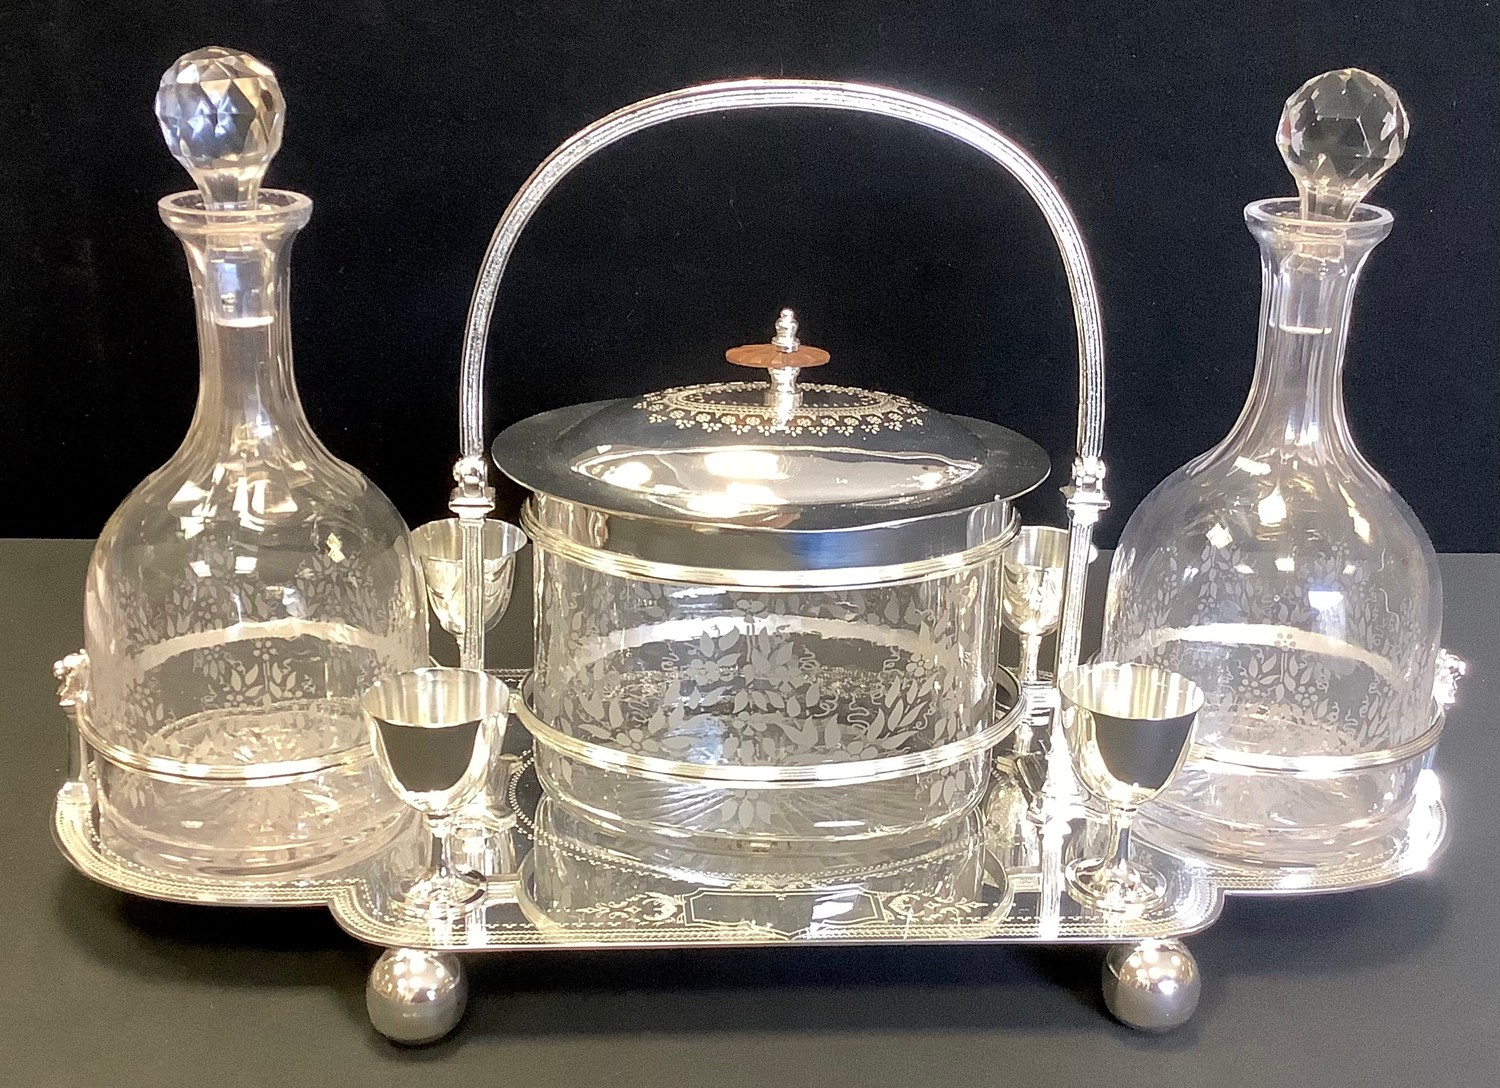 A contemporary silver plated decanter set, with two clear glass decanters, central wafer box, and